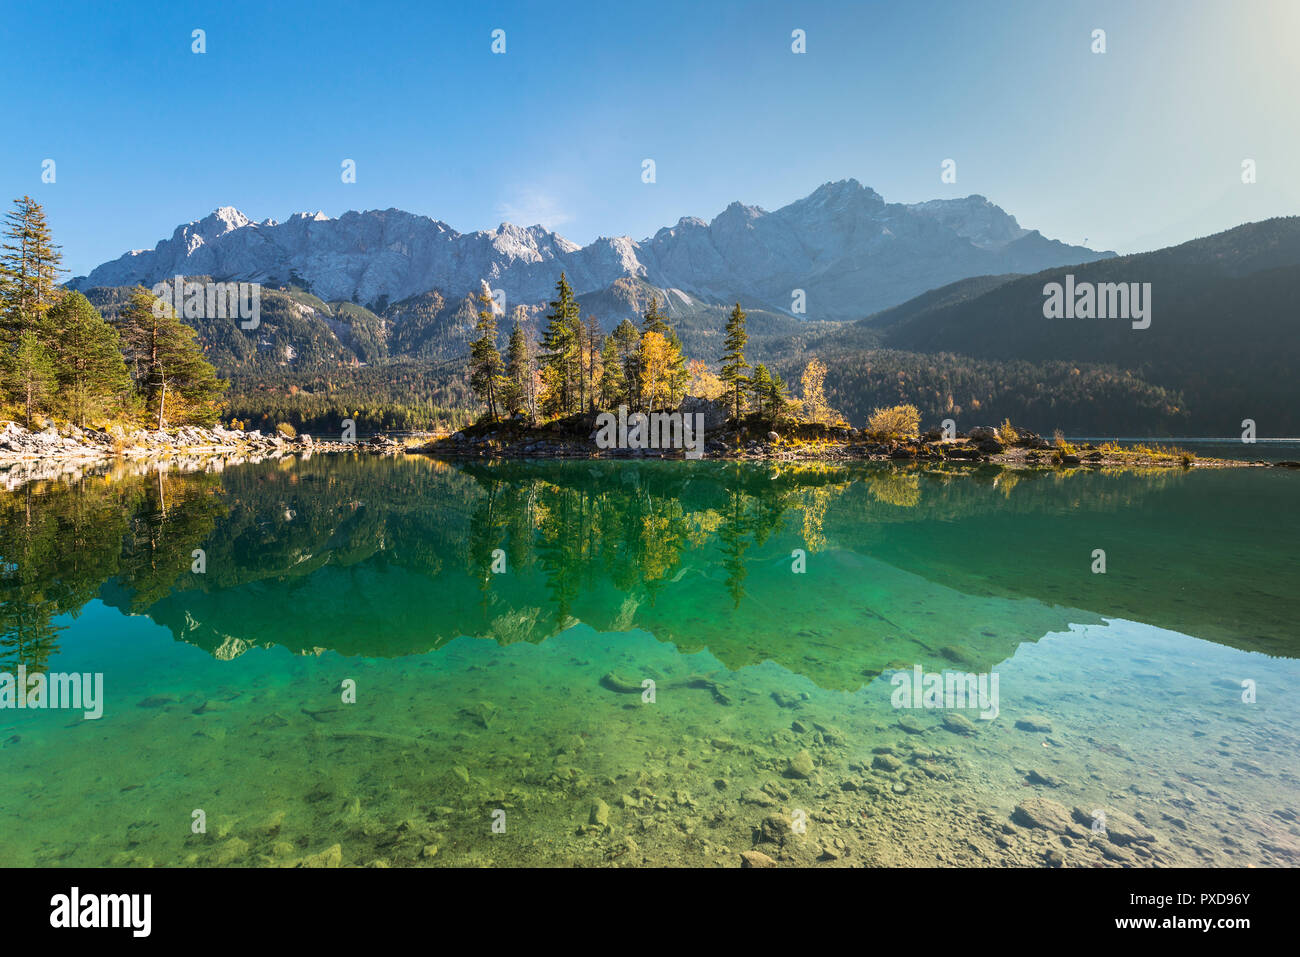 Autumn colored trees on the Braxeninsel in the Lake Eibsee in front of  the summit of Mount Zugspitze in the Wetterstein mountain range, Germany Stock Photo